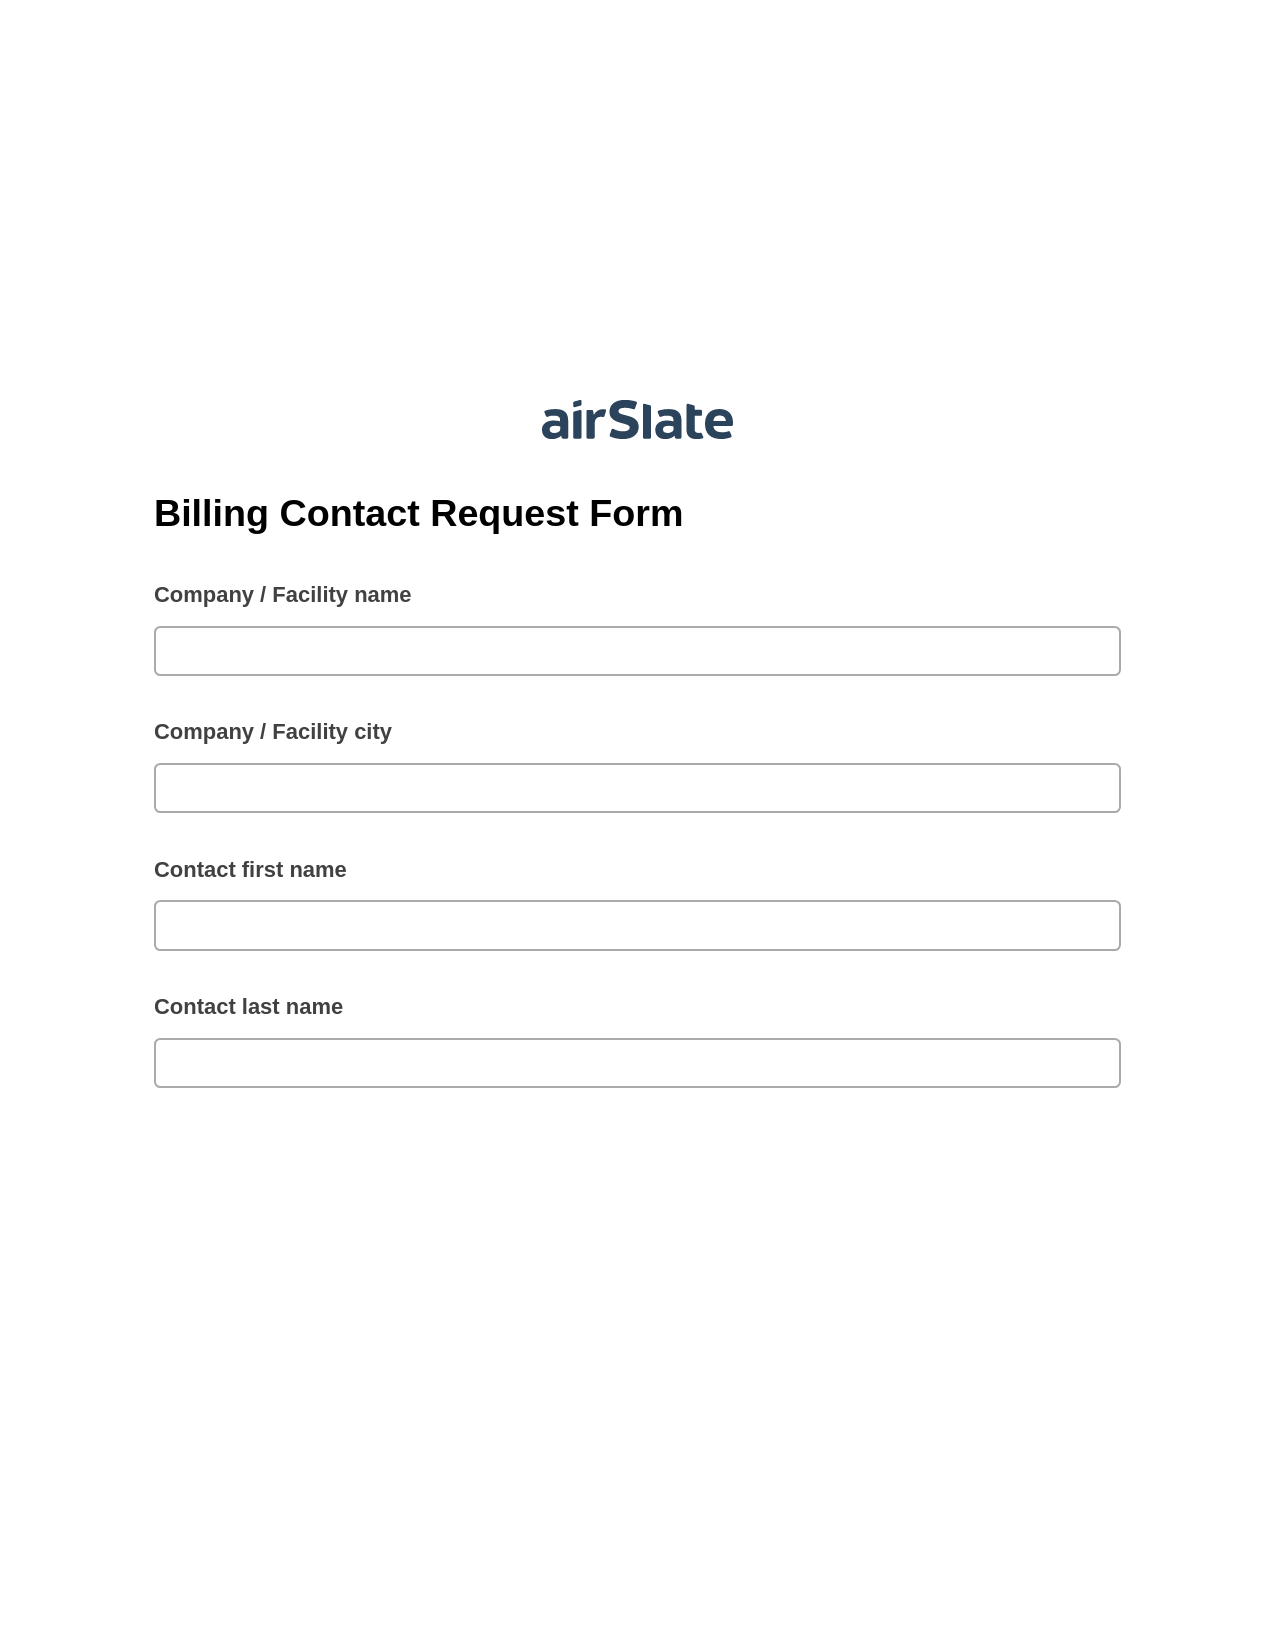 Multirole Billing Contact Request Form Pre-fill Dropdowns from MySQL Bot, Remove Tags From Slate Bot, Post-finish Document Bot